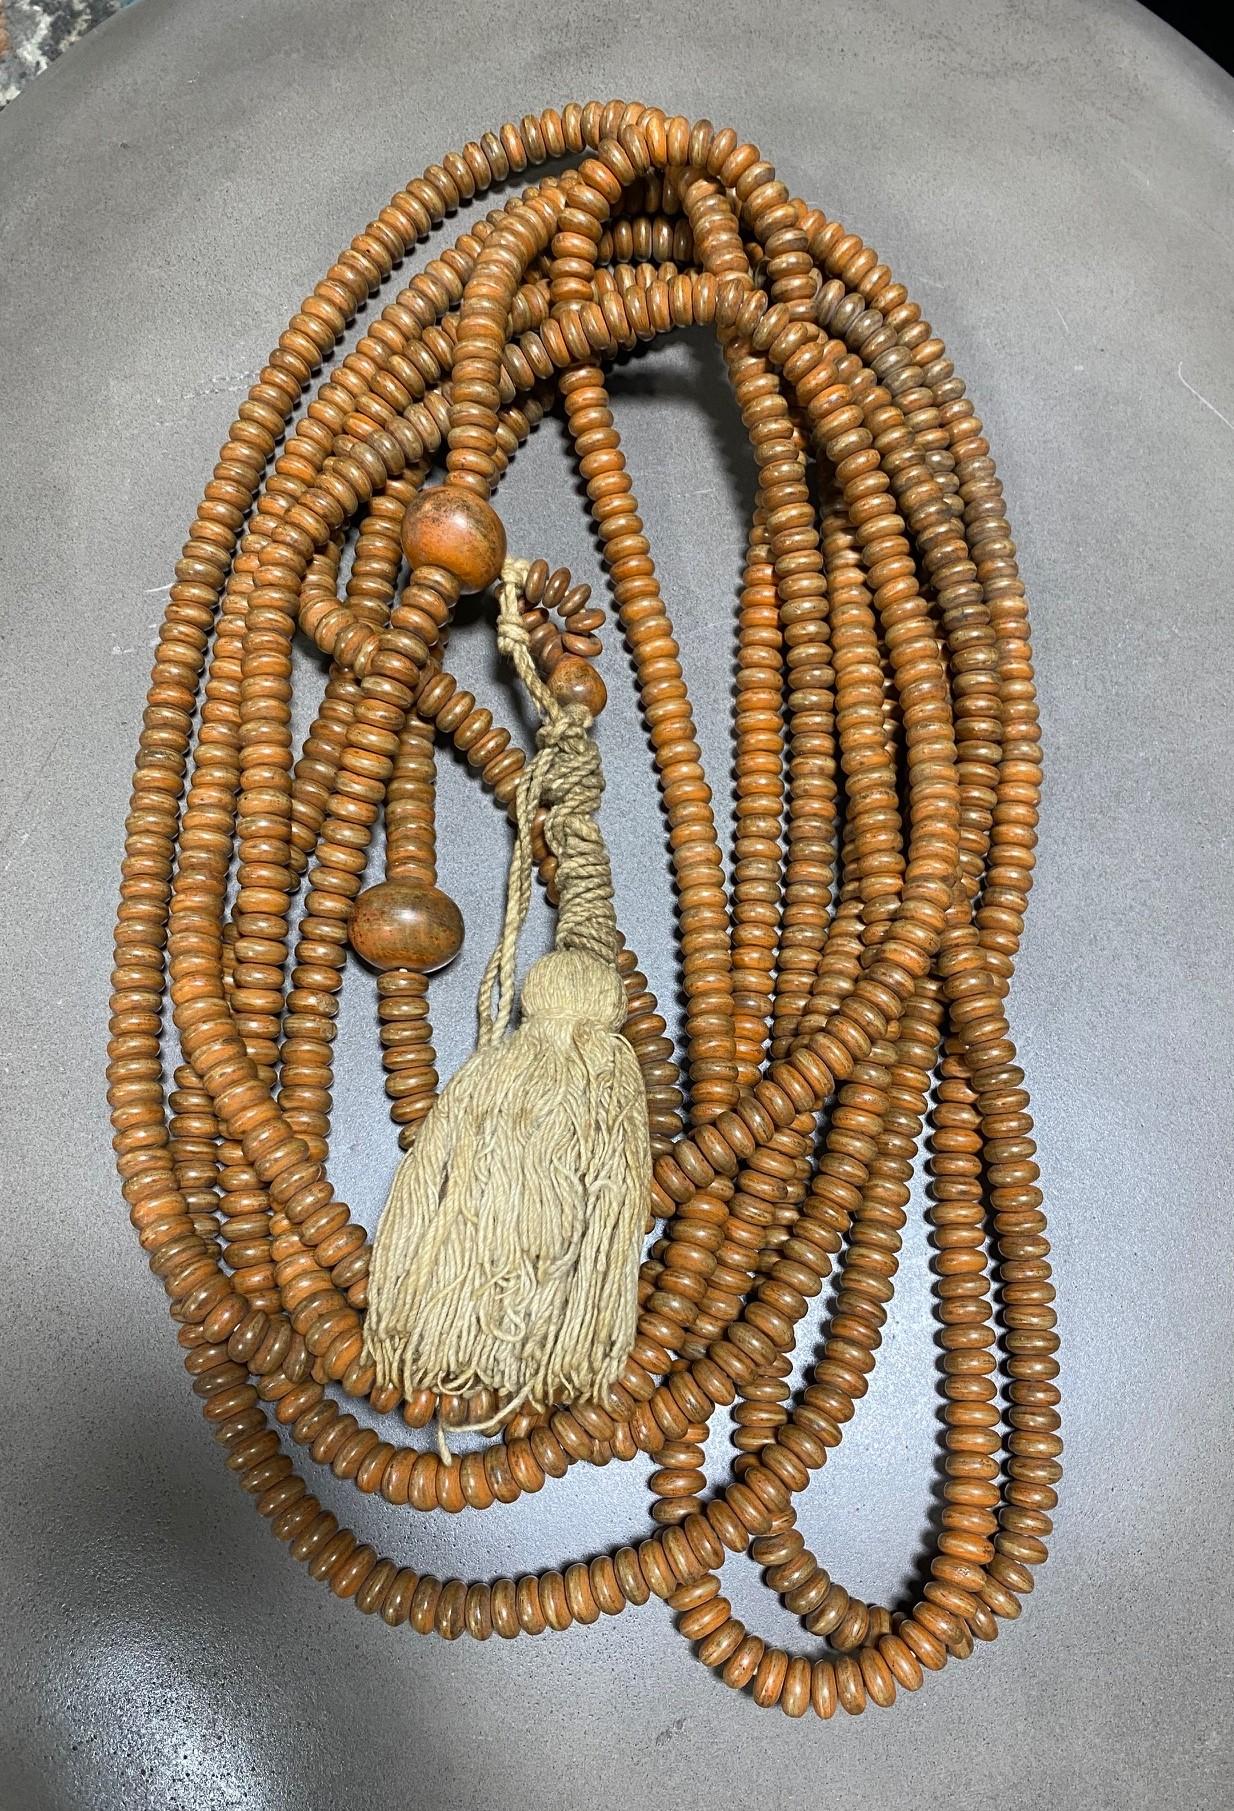 A truly magnificent and special work - this nearly 20-foot long string of Japanese hand-crafted natural wooden (perhaps Rosewood) Buddhist Juzu mala beads with customary larger 